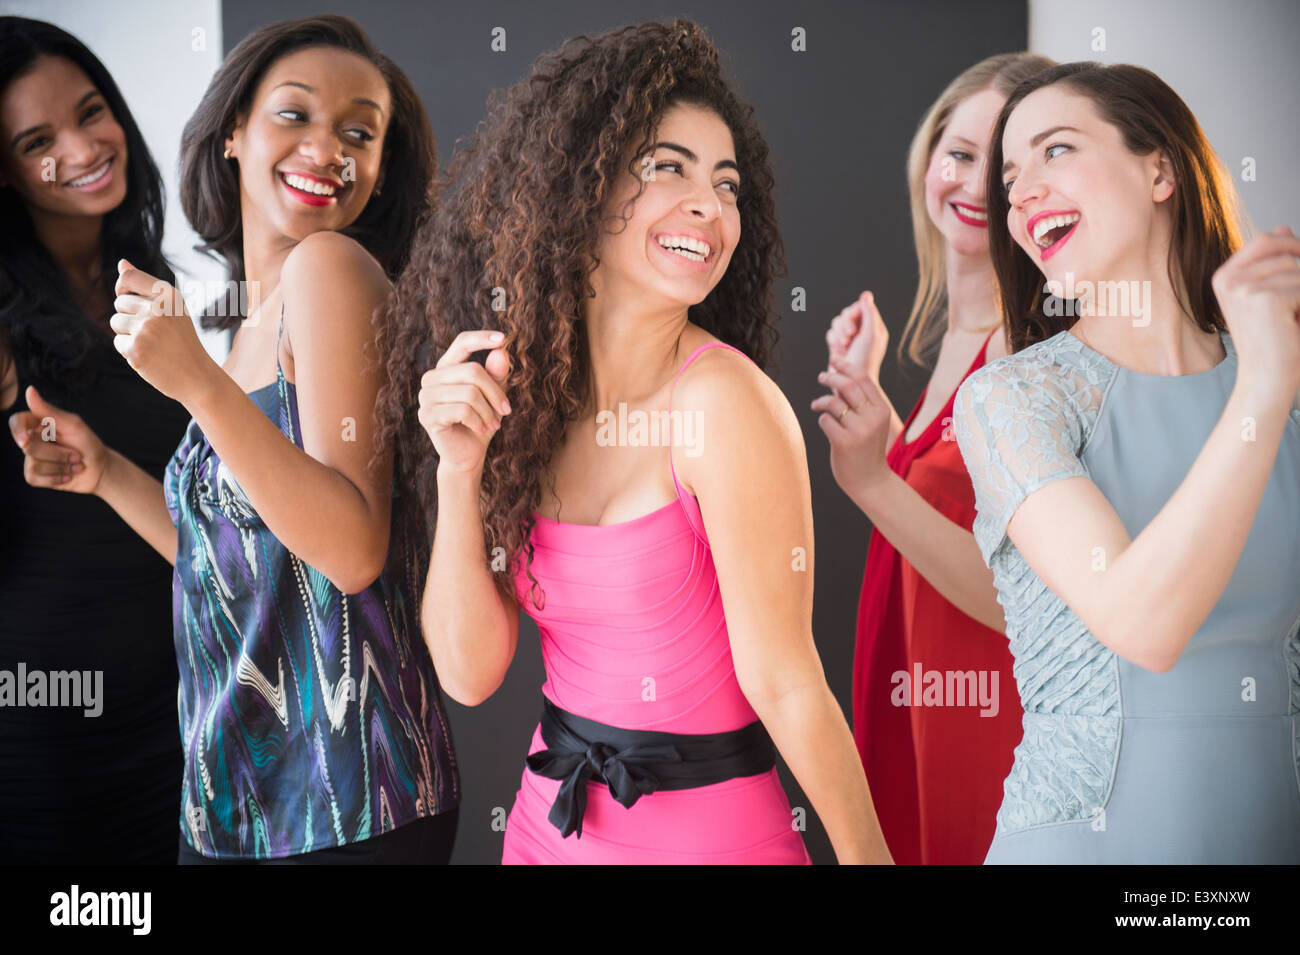 Women dancing together Stock Photo